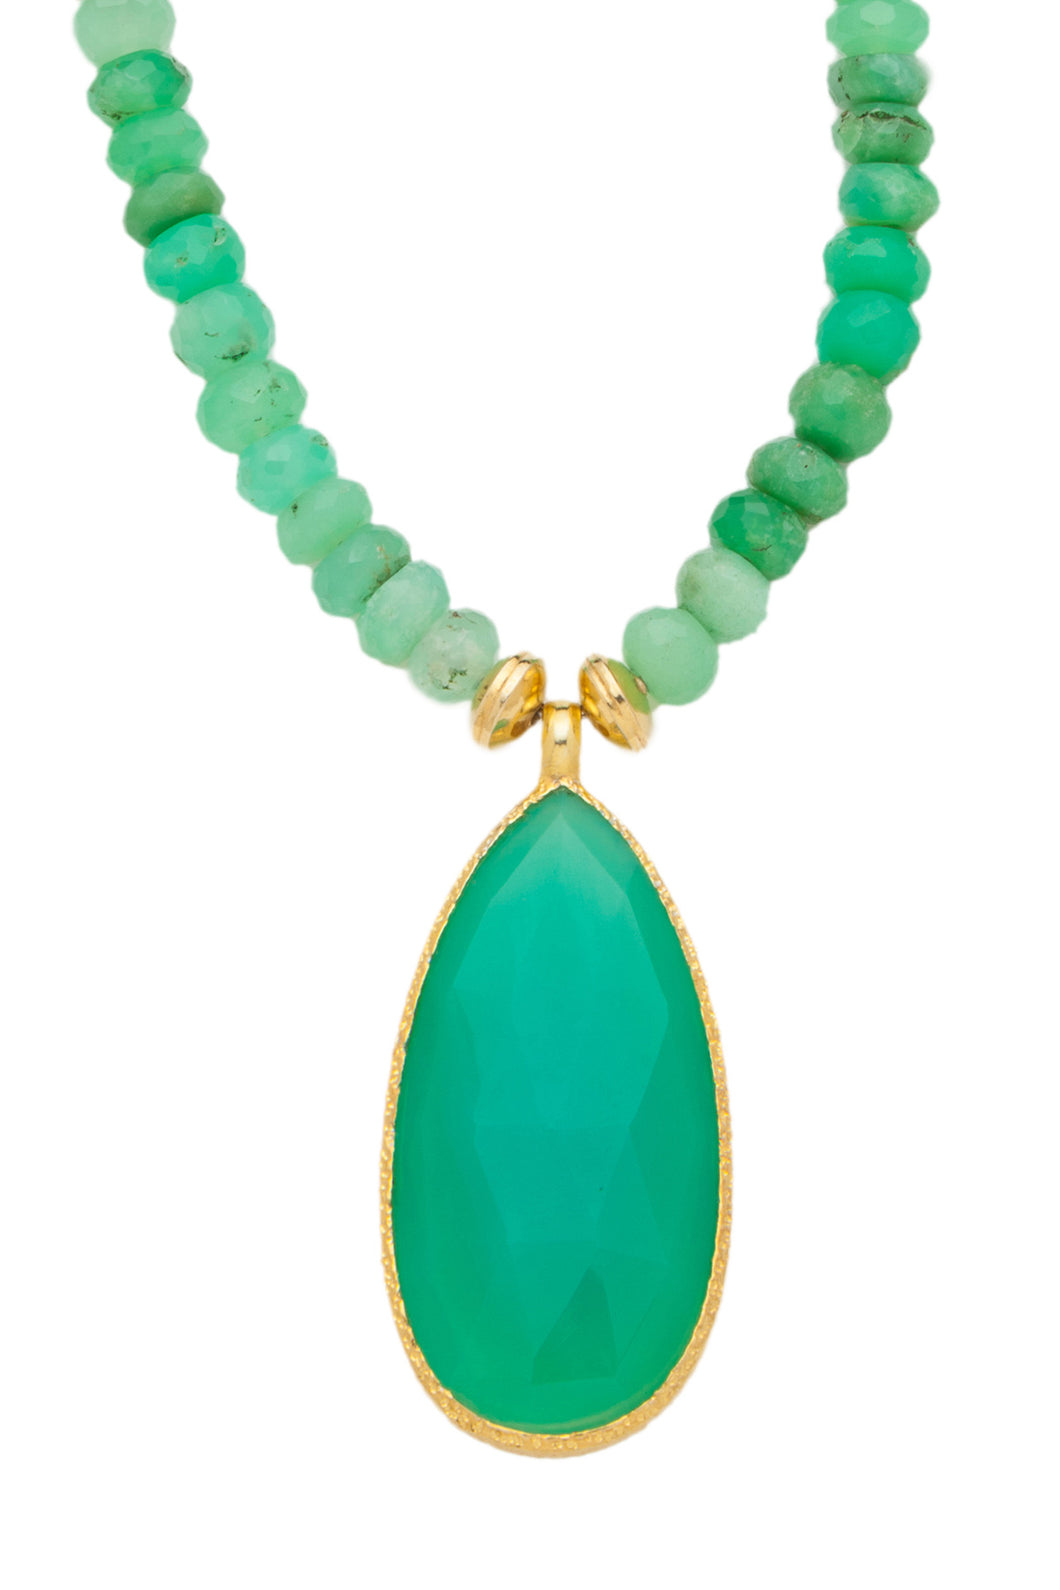 ONE OF A KIND Green Chrysoprase Necklace with Teardrop Pendant set in 24kt gold vermeil  NF291